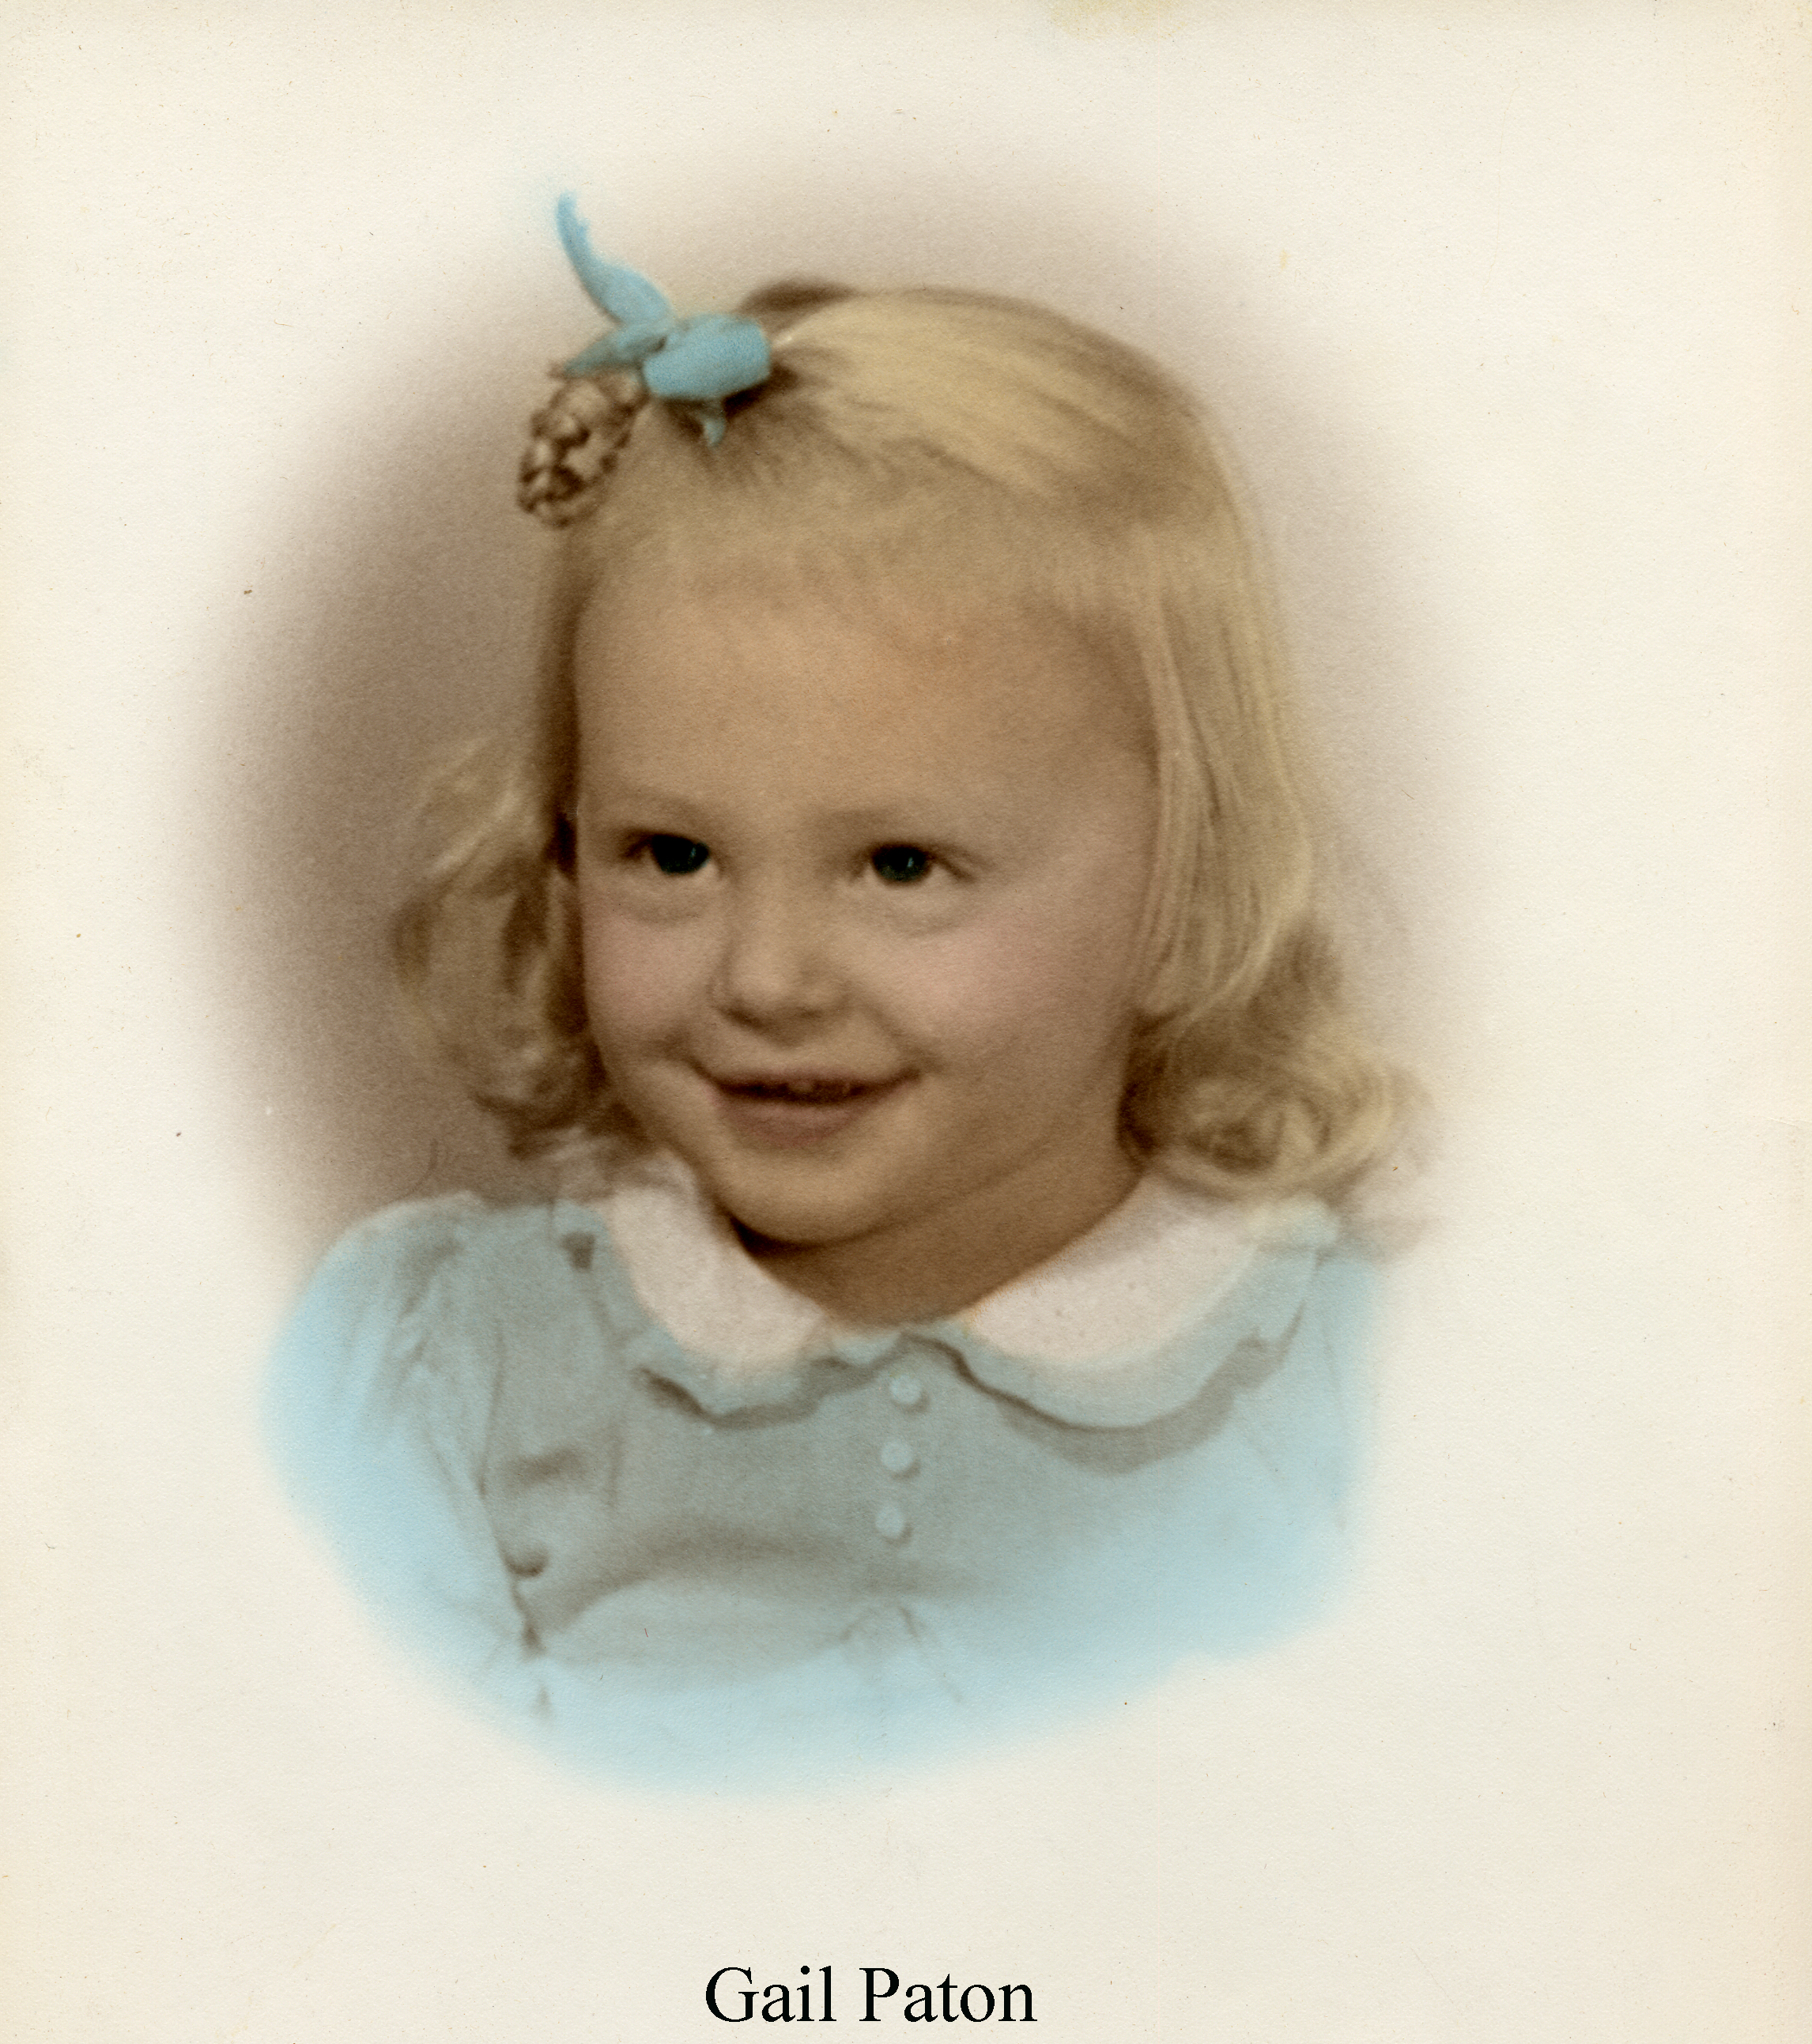 Studio photo of a smiling Gail Doris Paton in a blue dress 
              and with a blue ribbon in her hair